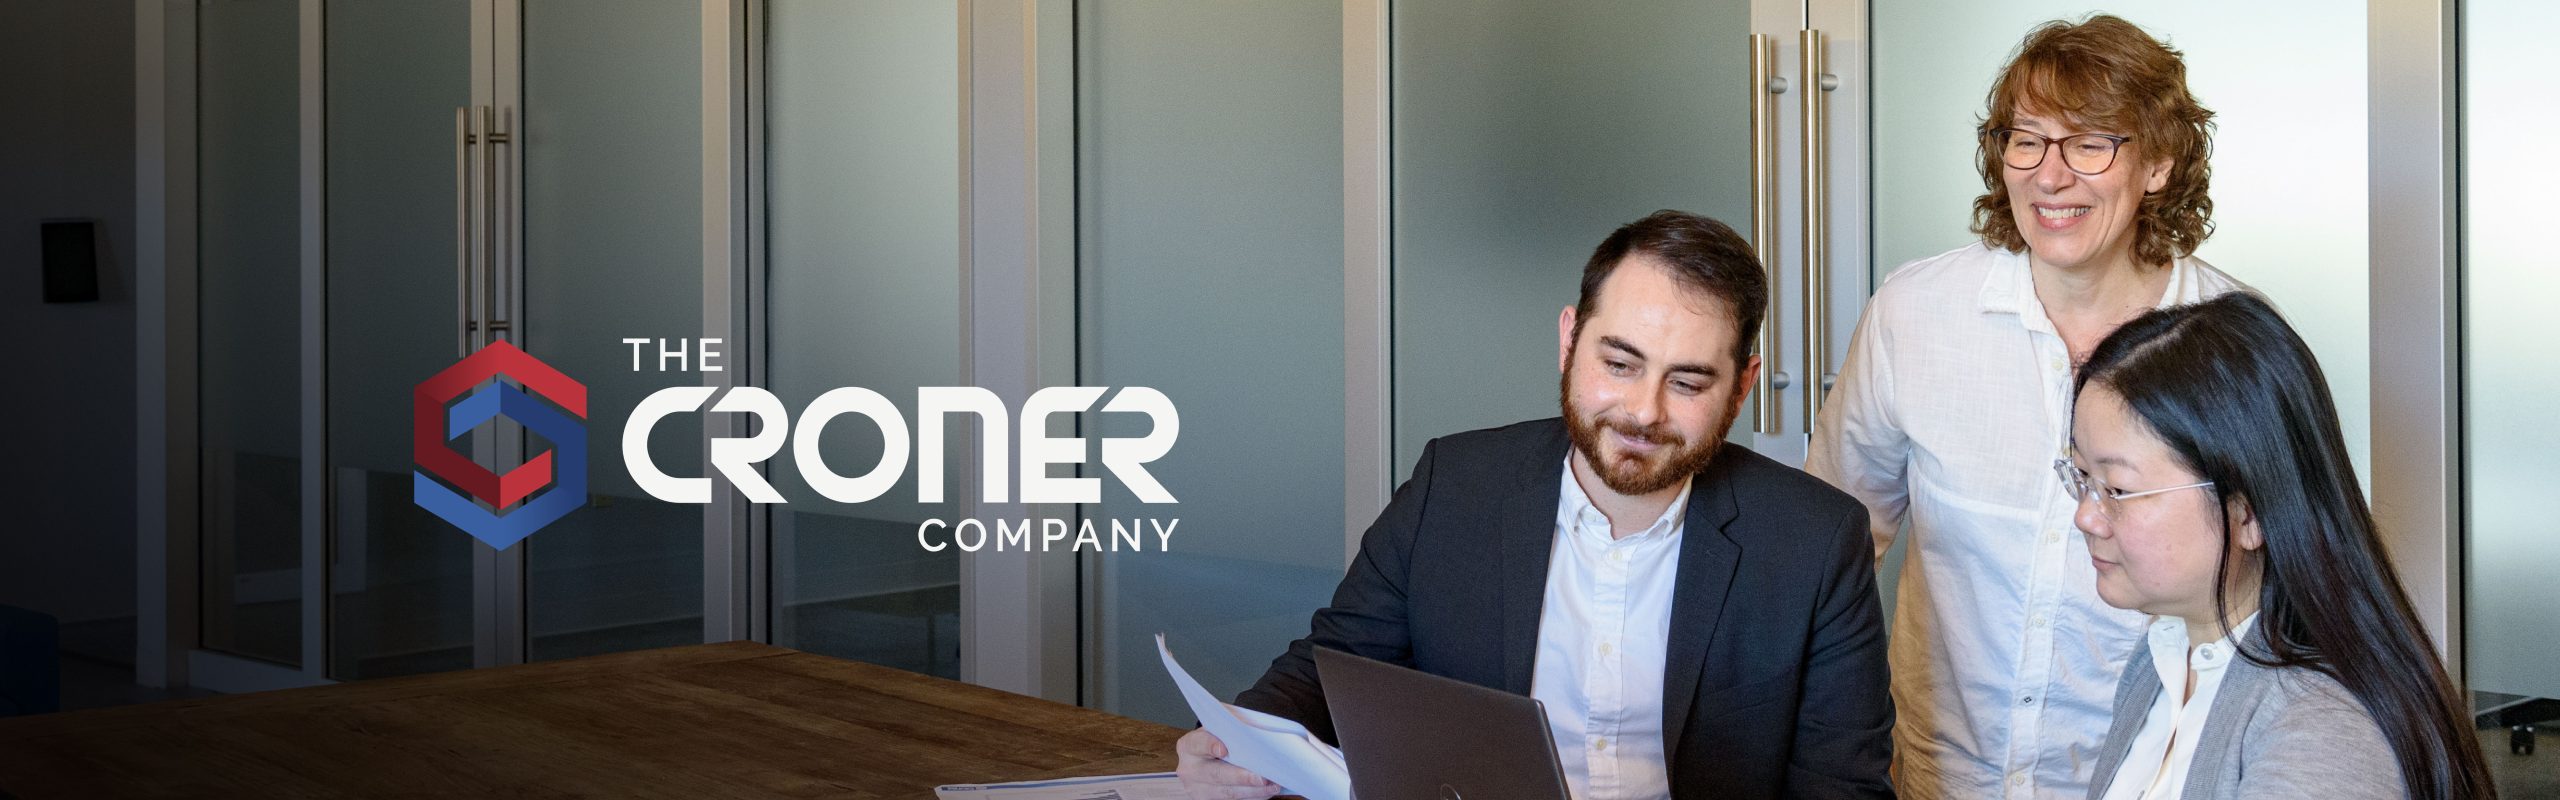 Three professionals reviewing documents together in a conference room with The Croner Company logo displayed on the wall.